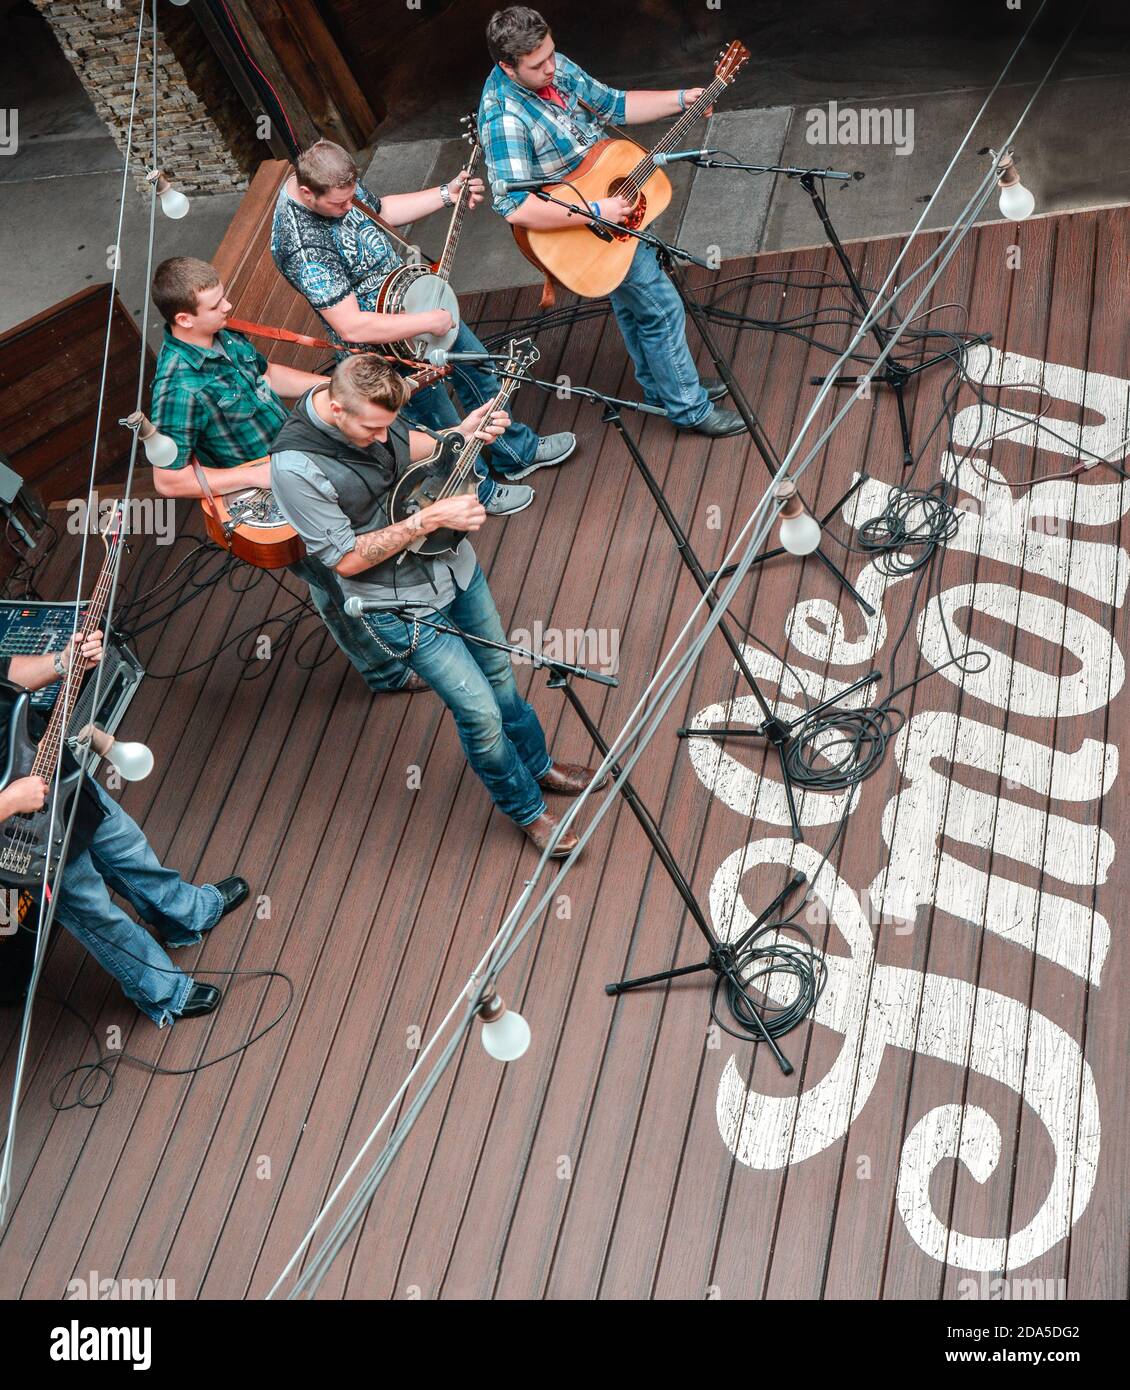 Overhead view of modern Blue grass band,  'Monroeville' playing a concert on stage at the Ole Smoky Moonshine Distillery, Gatlinburg, TN Stock Photo